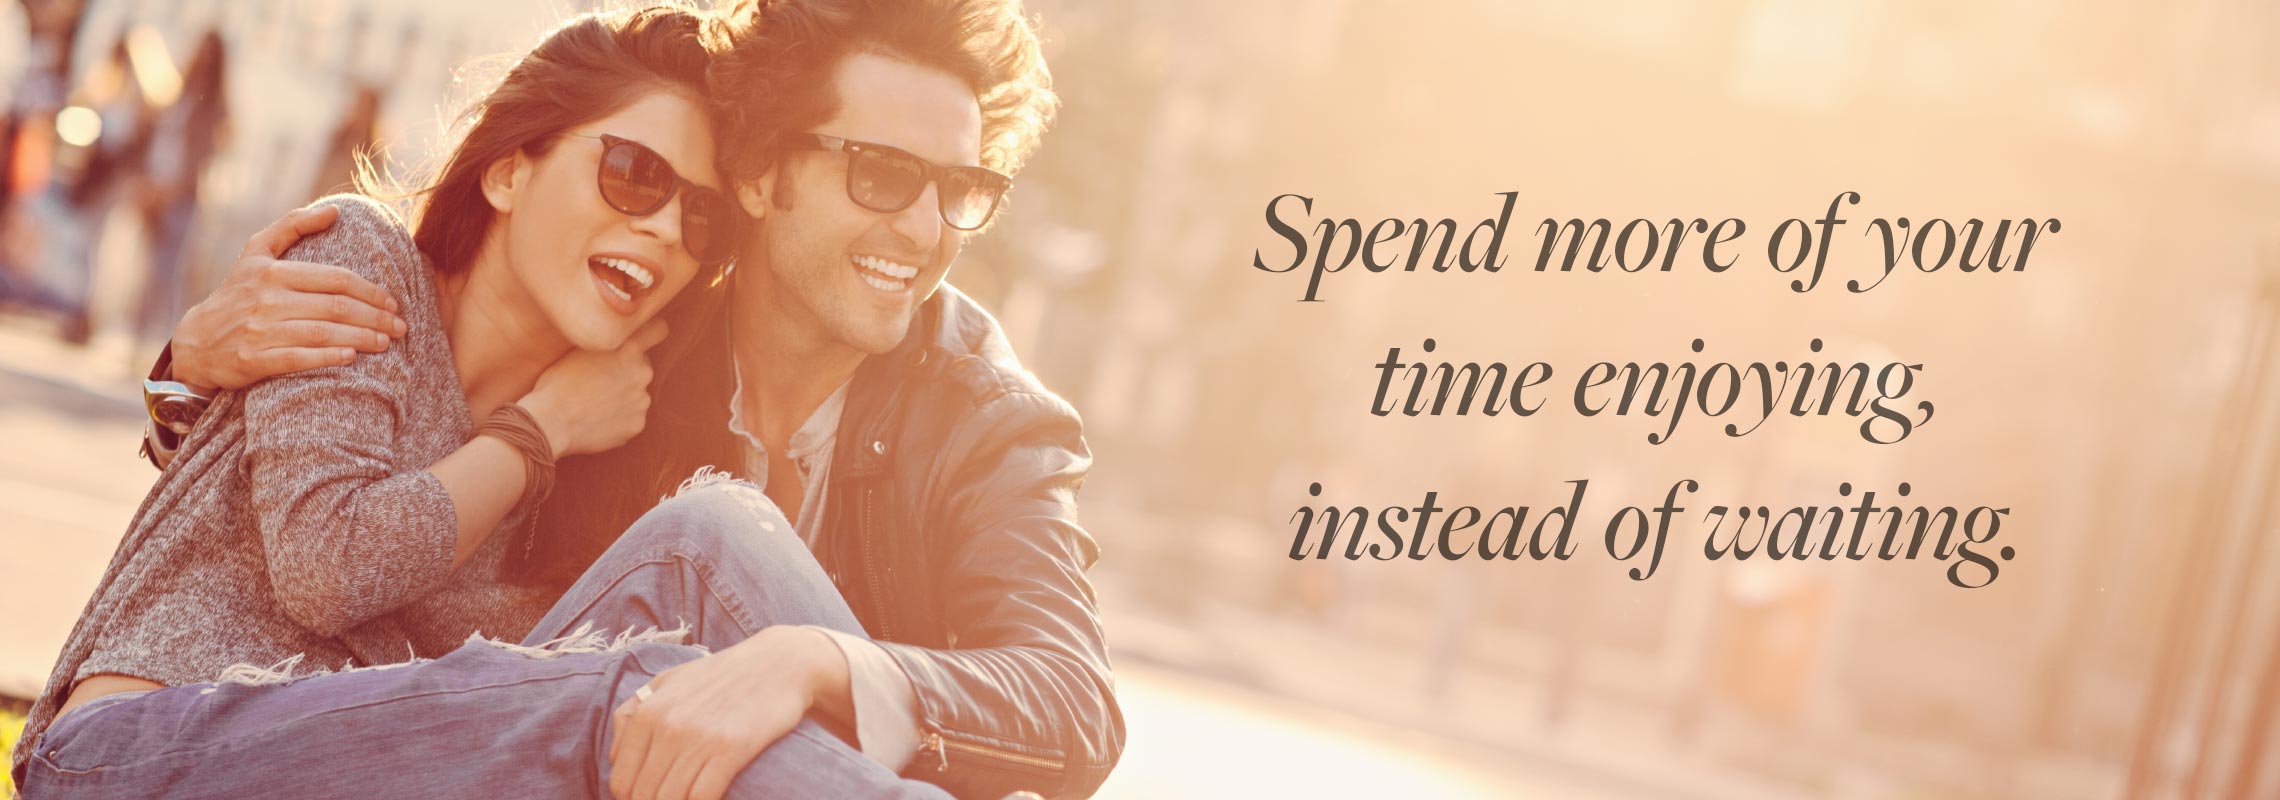 Happy, young couple enjoying the outdoors in the sun, wearing glasses that have photochromic lenses that get darker in the sunlight with the statement on the image; Spend more of your time enjoying, instead of waiting.